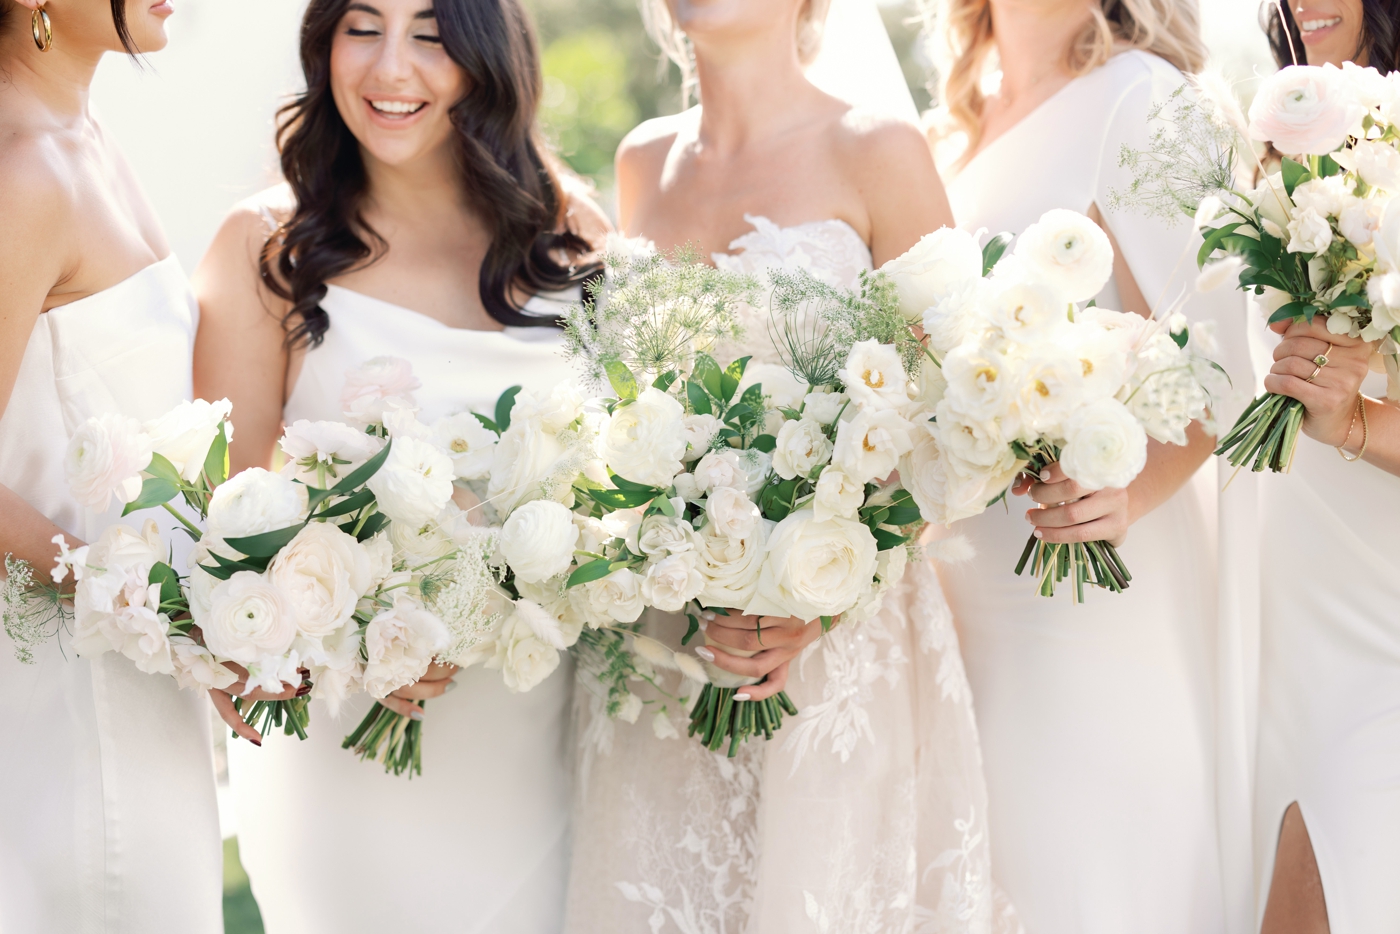 White bridal bouquets filled with roses, poppies, and Queen Anne's Lace by Stems Floral